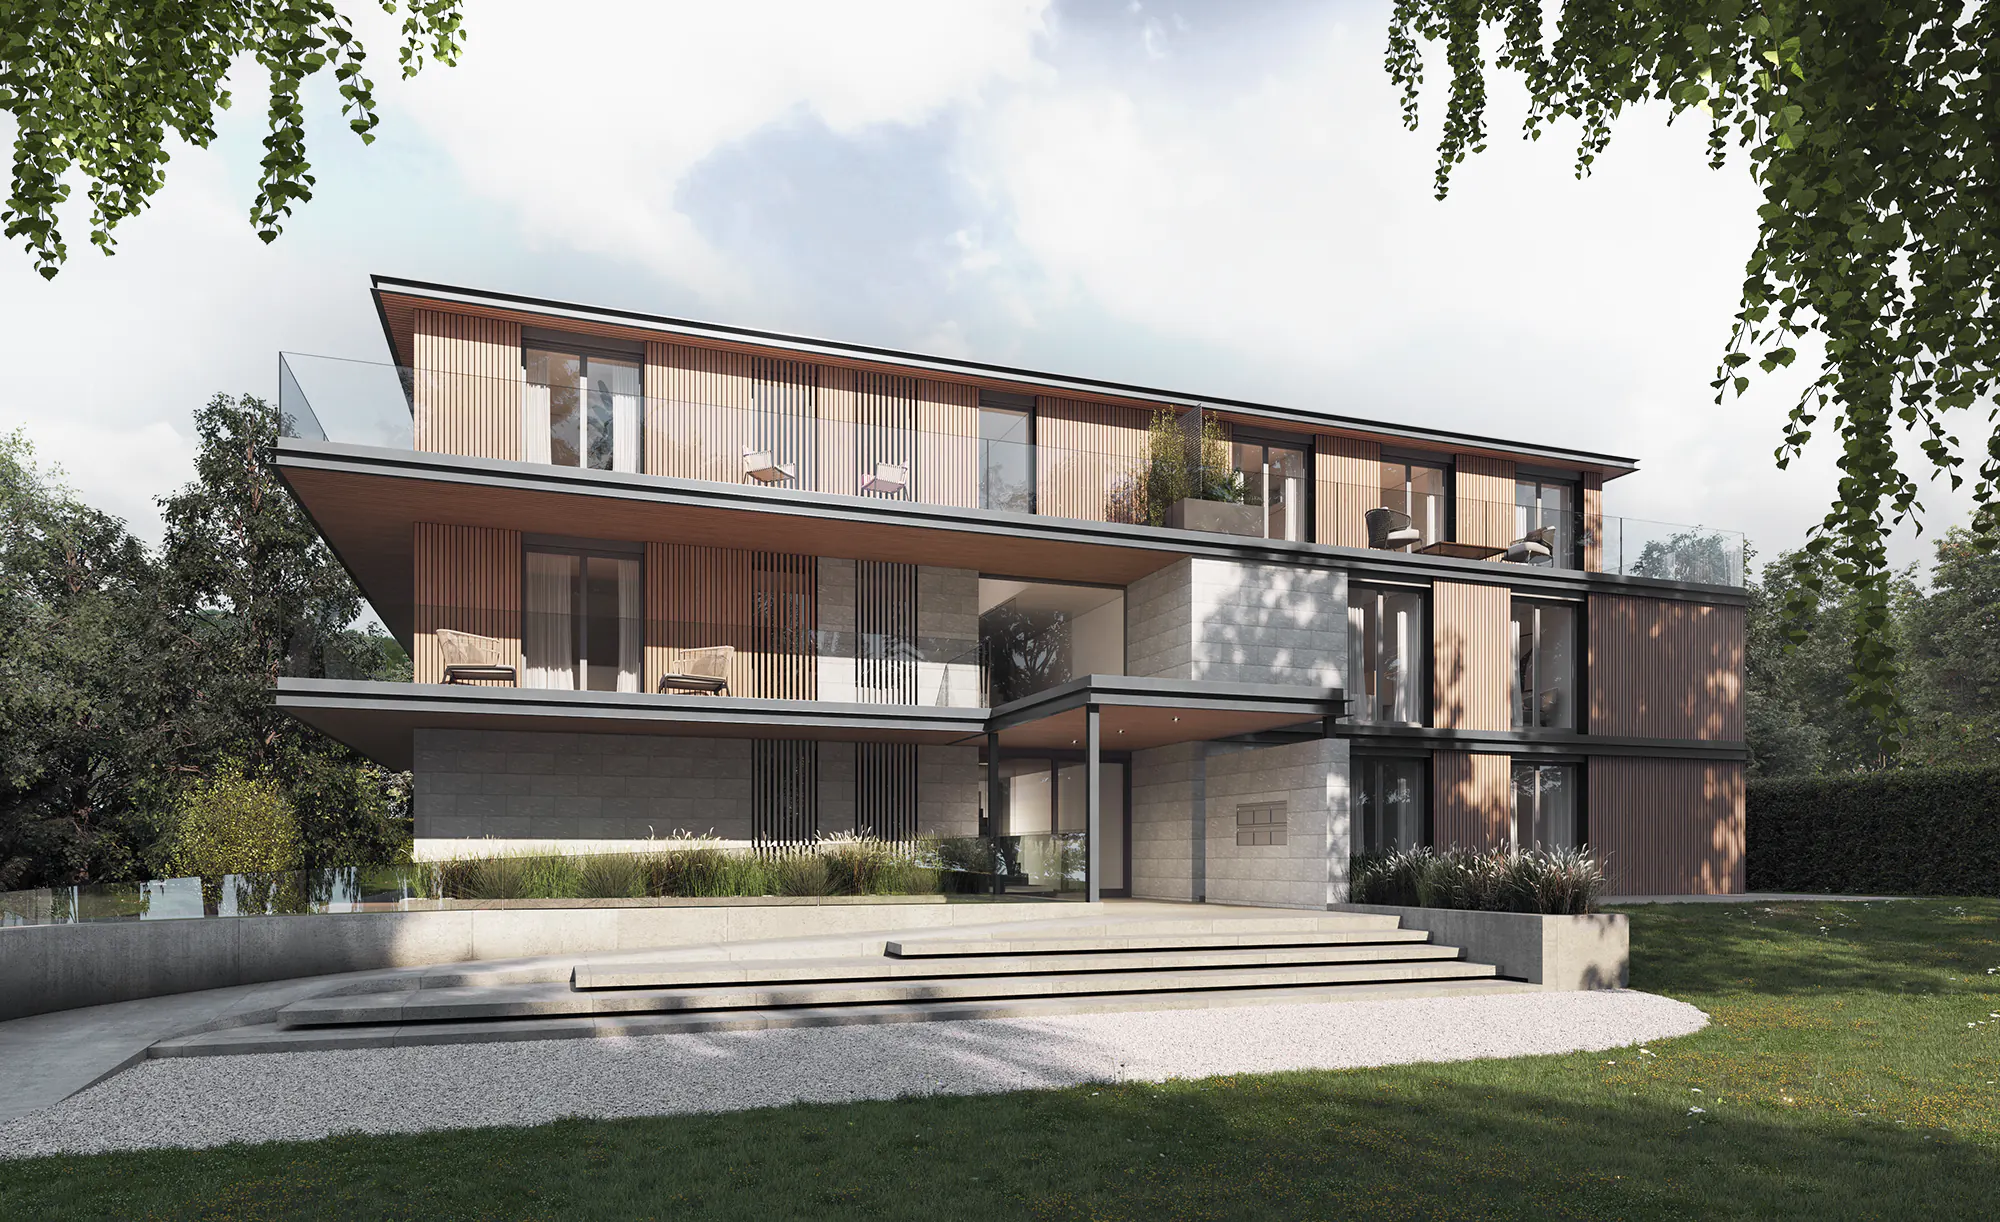 Architectural-rendering-thun-photorealistic-exterior-view